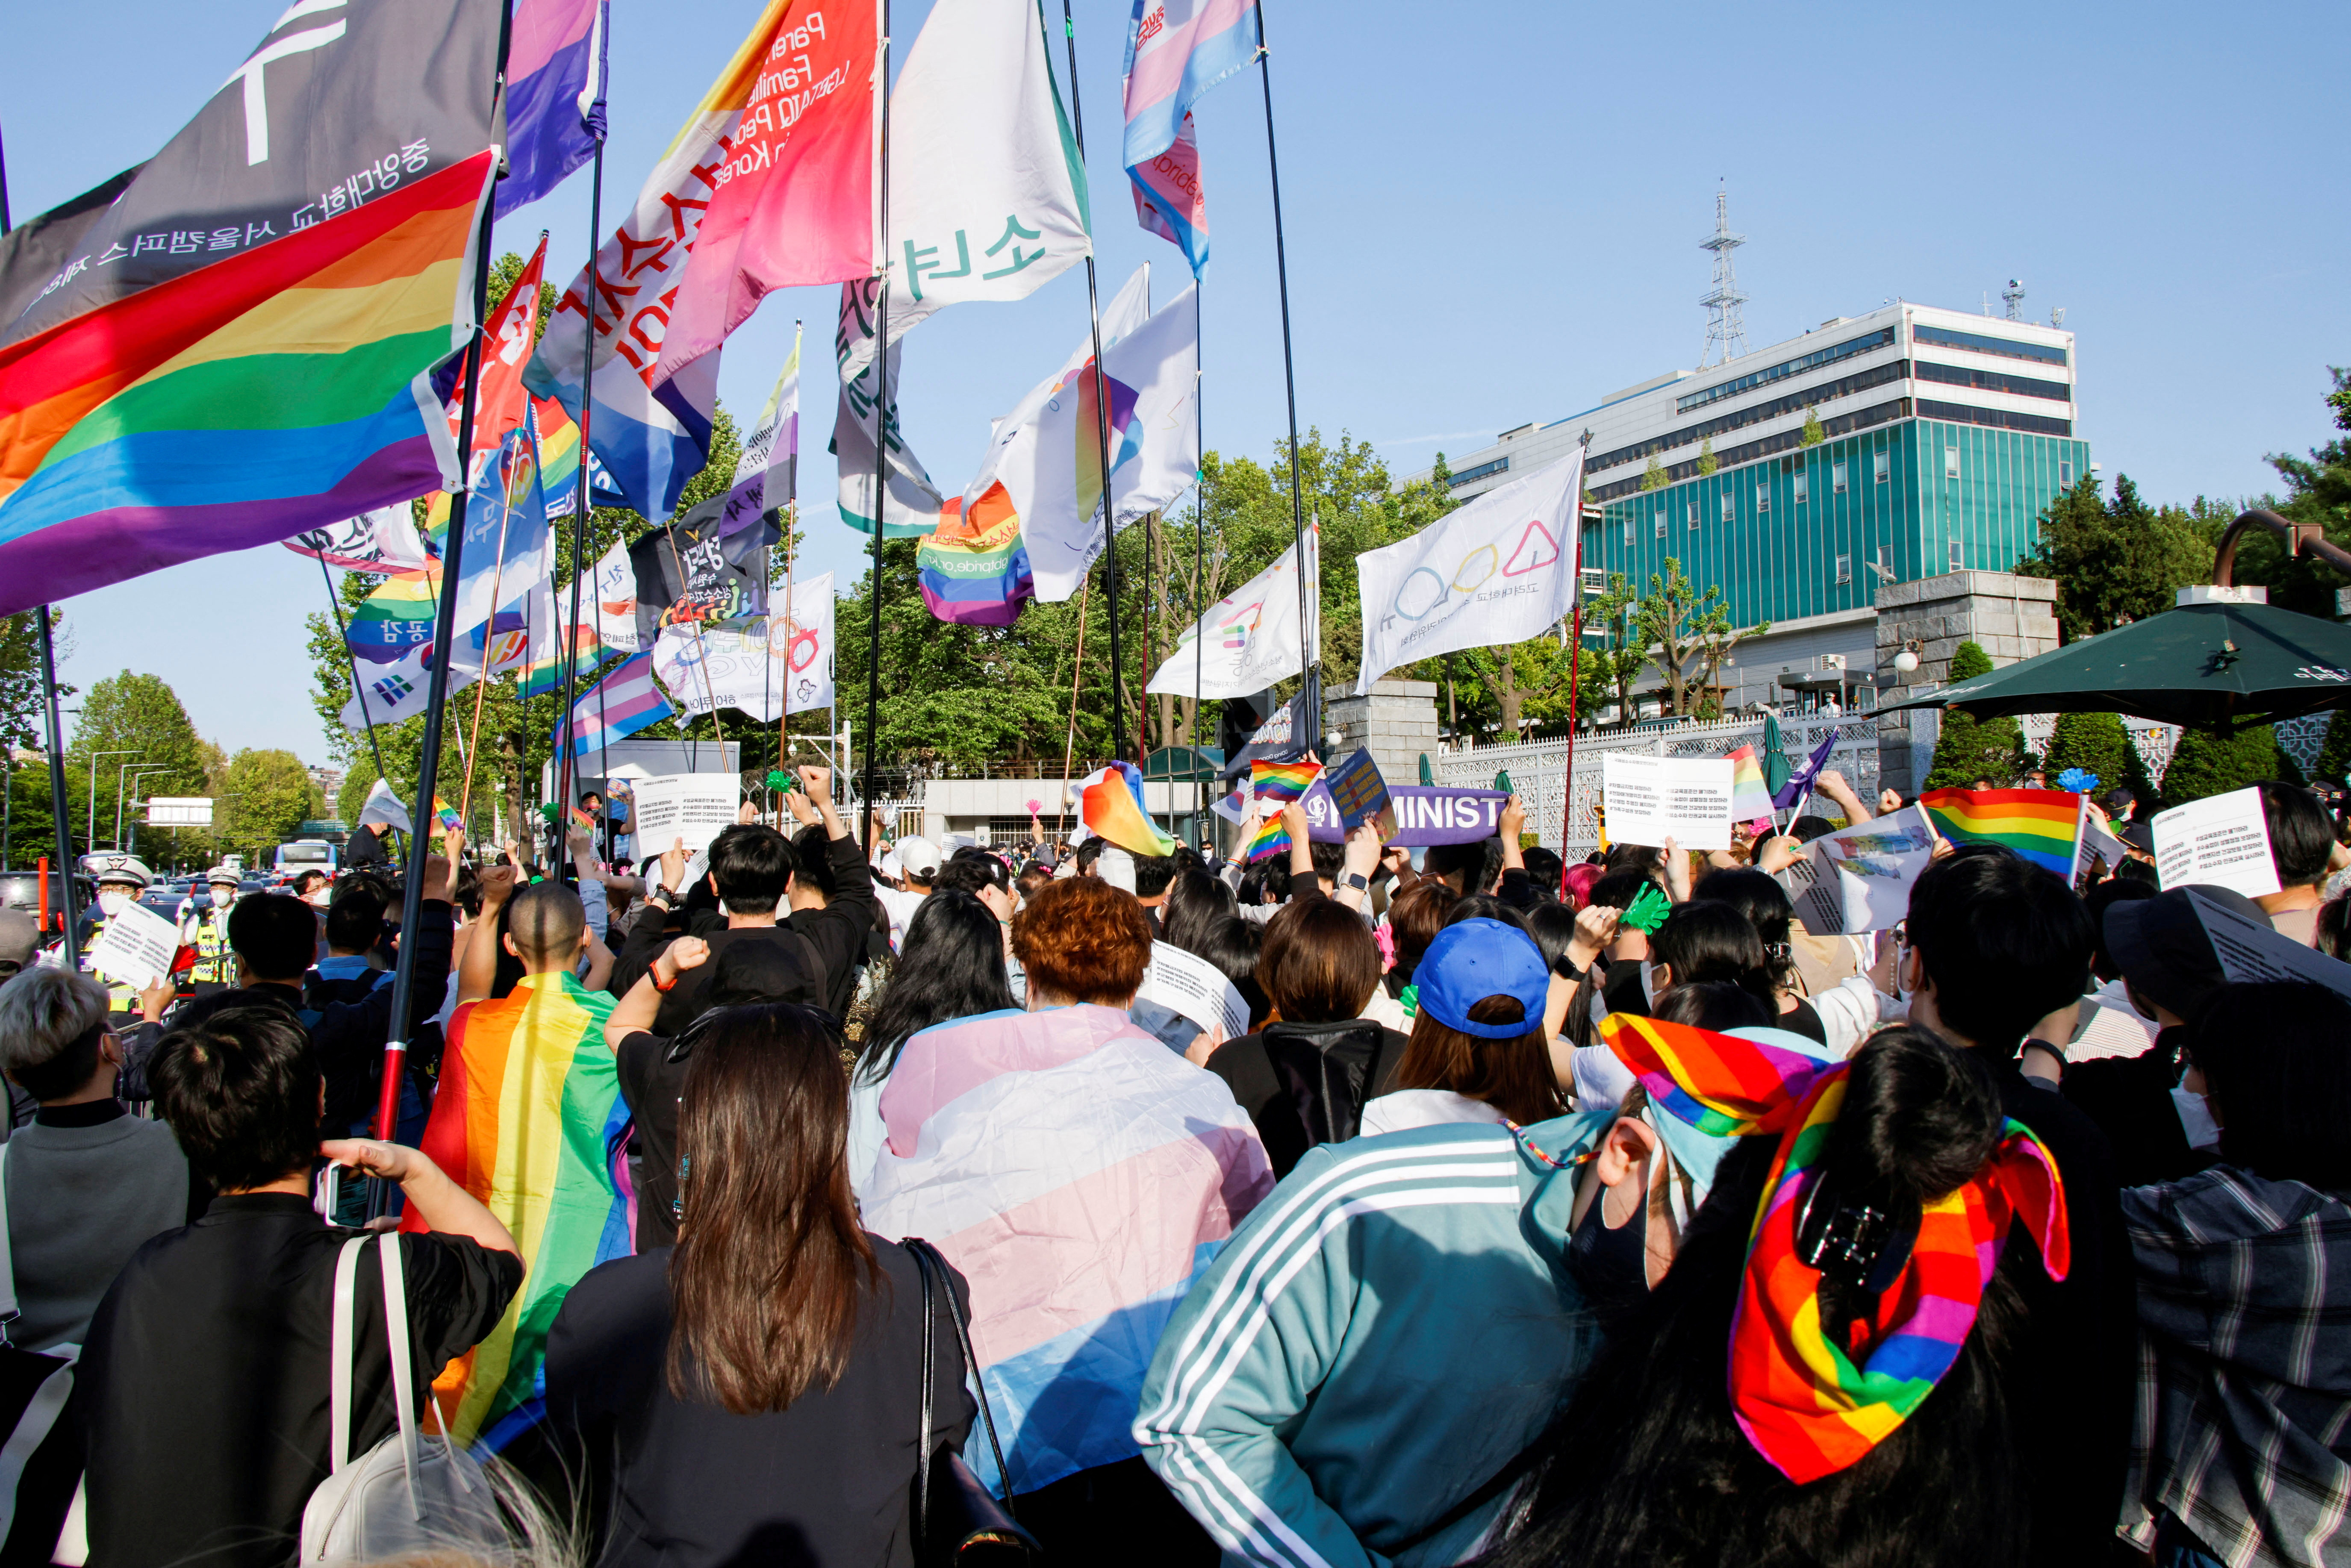 Members of the LGBTQ+ community march in front of the new Presidential office during a protest ahead of the International Day Against Homophobia, Transphobia and Biphobia, in Seoul